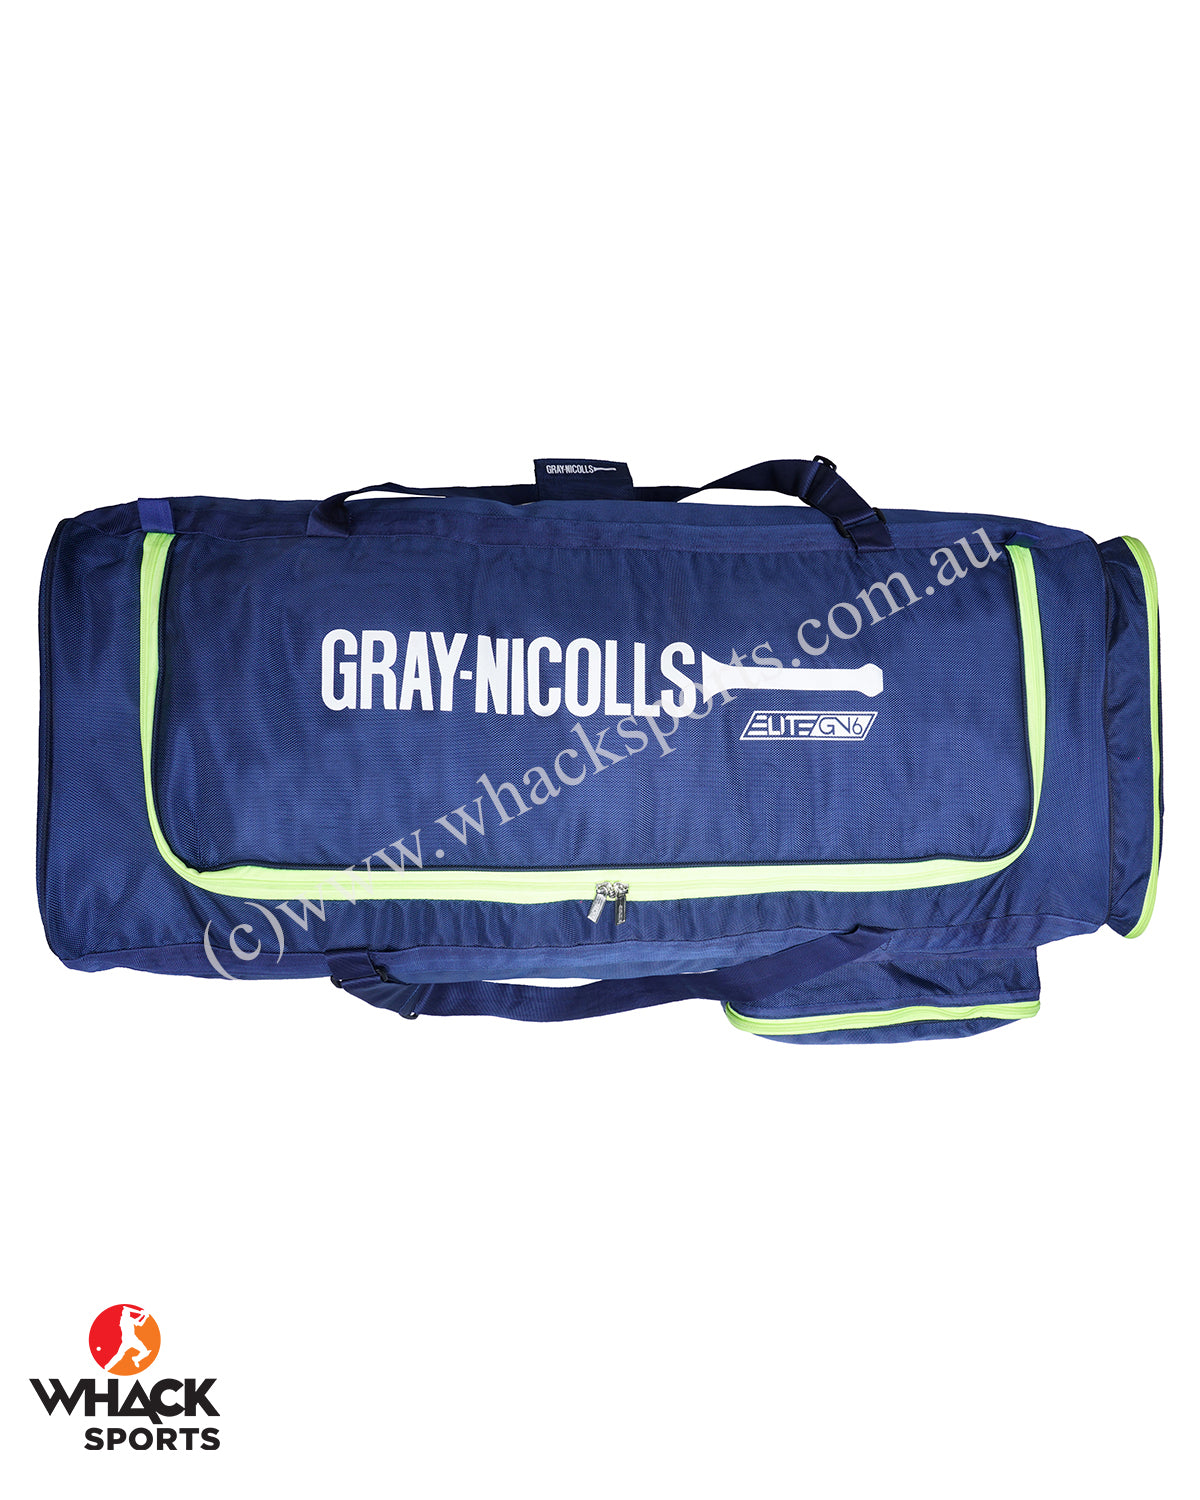 Buy SS Limited Edition Cricket Kit Bag Online